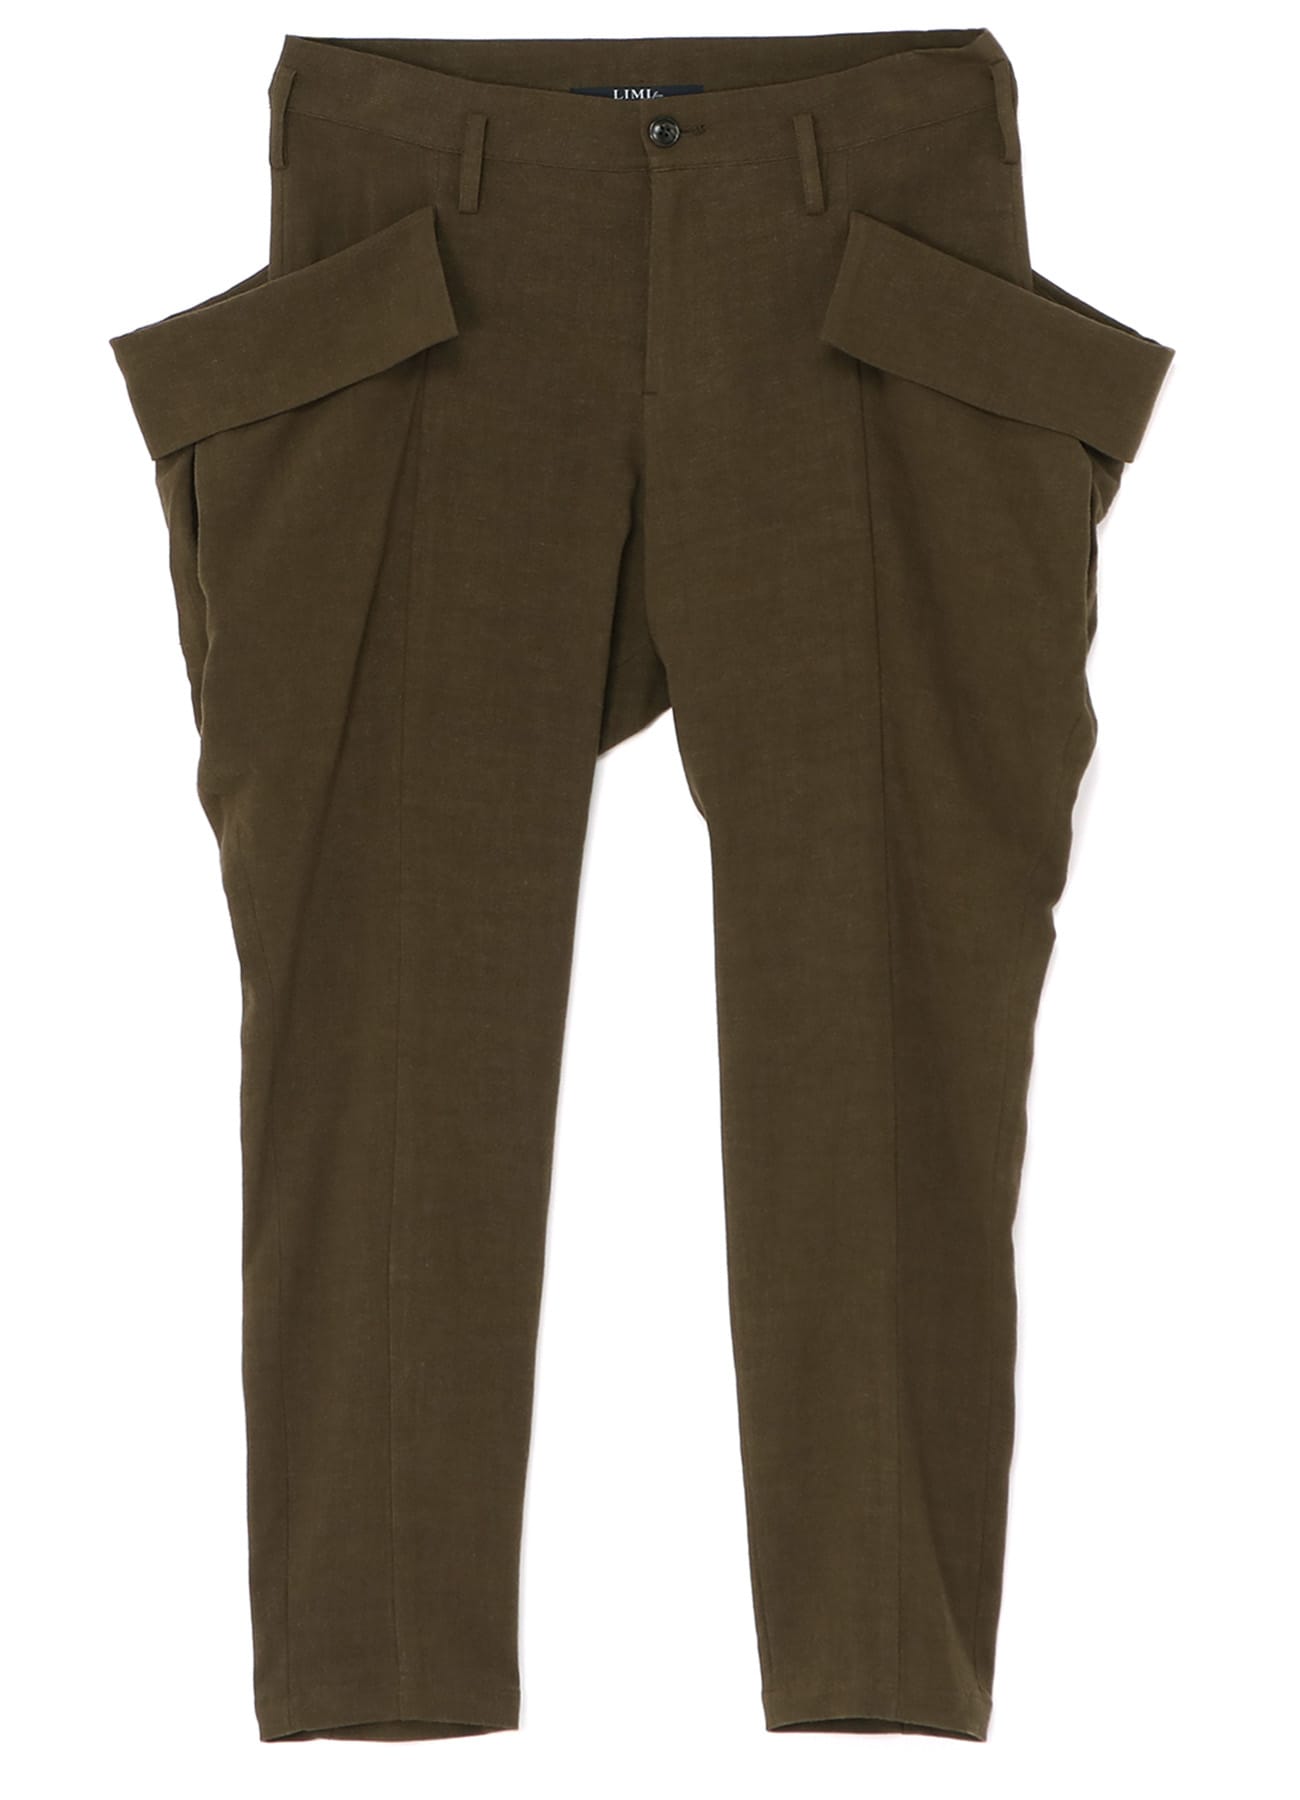 Viscose Full-Length Pants - Our Second Nature